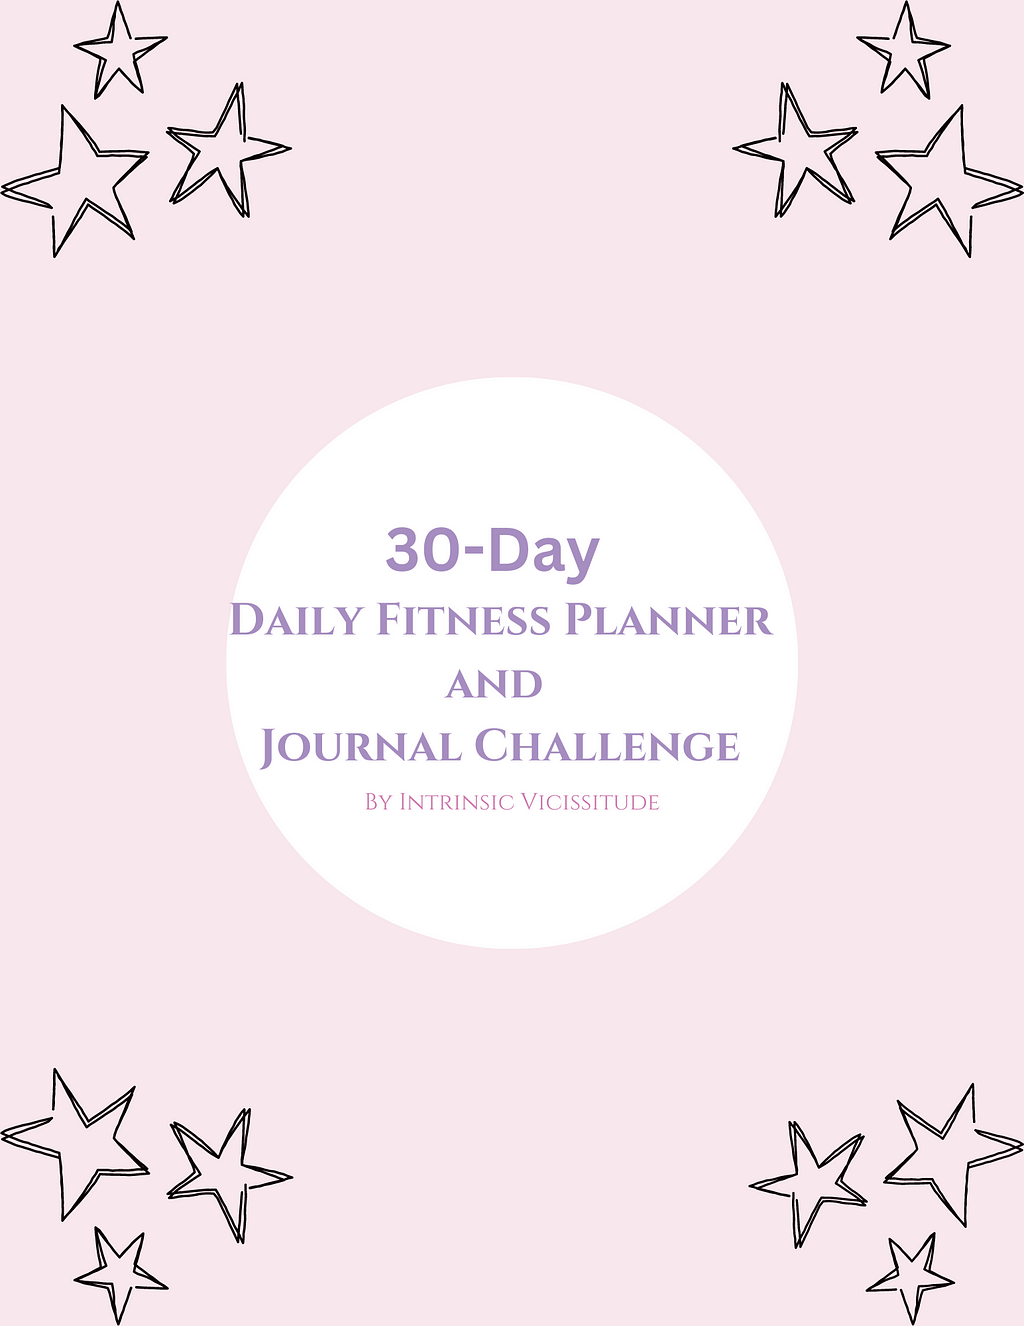 Light pink with stars cover of the 30-Day Daily Fitness Planner and Journal Challenge from Intrinsic VIcissitude.